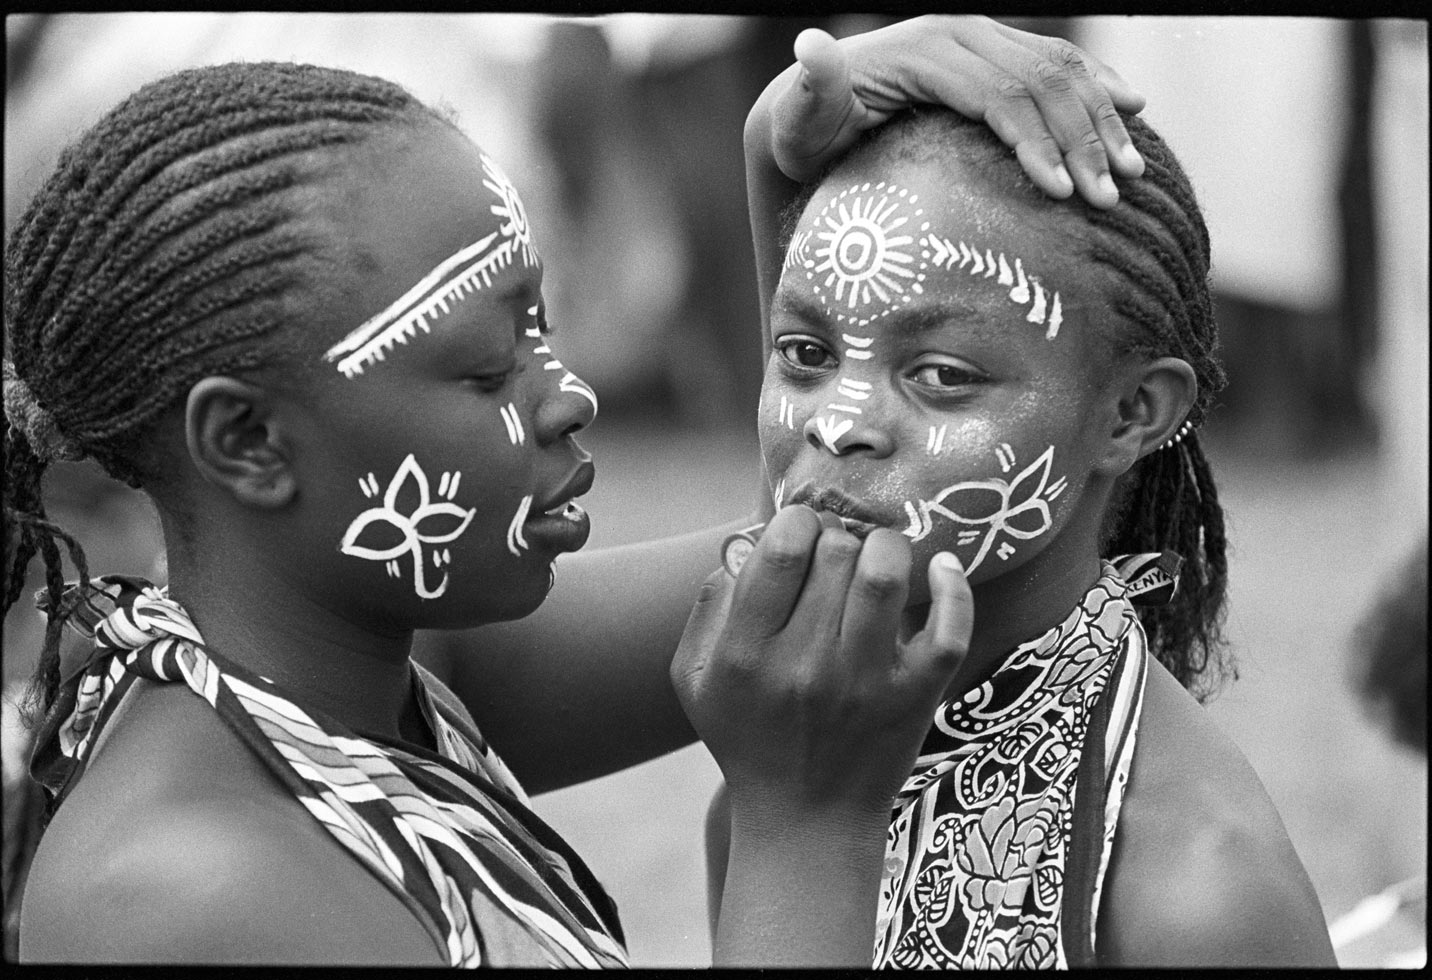 "She who spends time adorning herself knows she is going to dance." Kenyan proverb

Young dancers make up their faces in preparation for a dance. Many schools have extracurricular activities encouraging music, dance, and drama.

Kwangware Primary School Dancers, Nairobi, Kenya, 1990